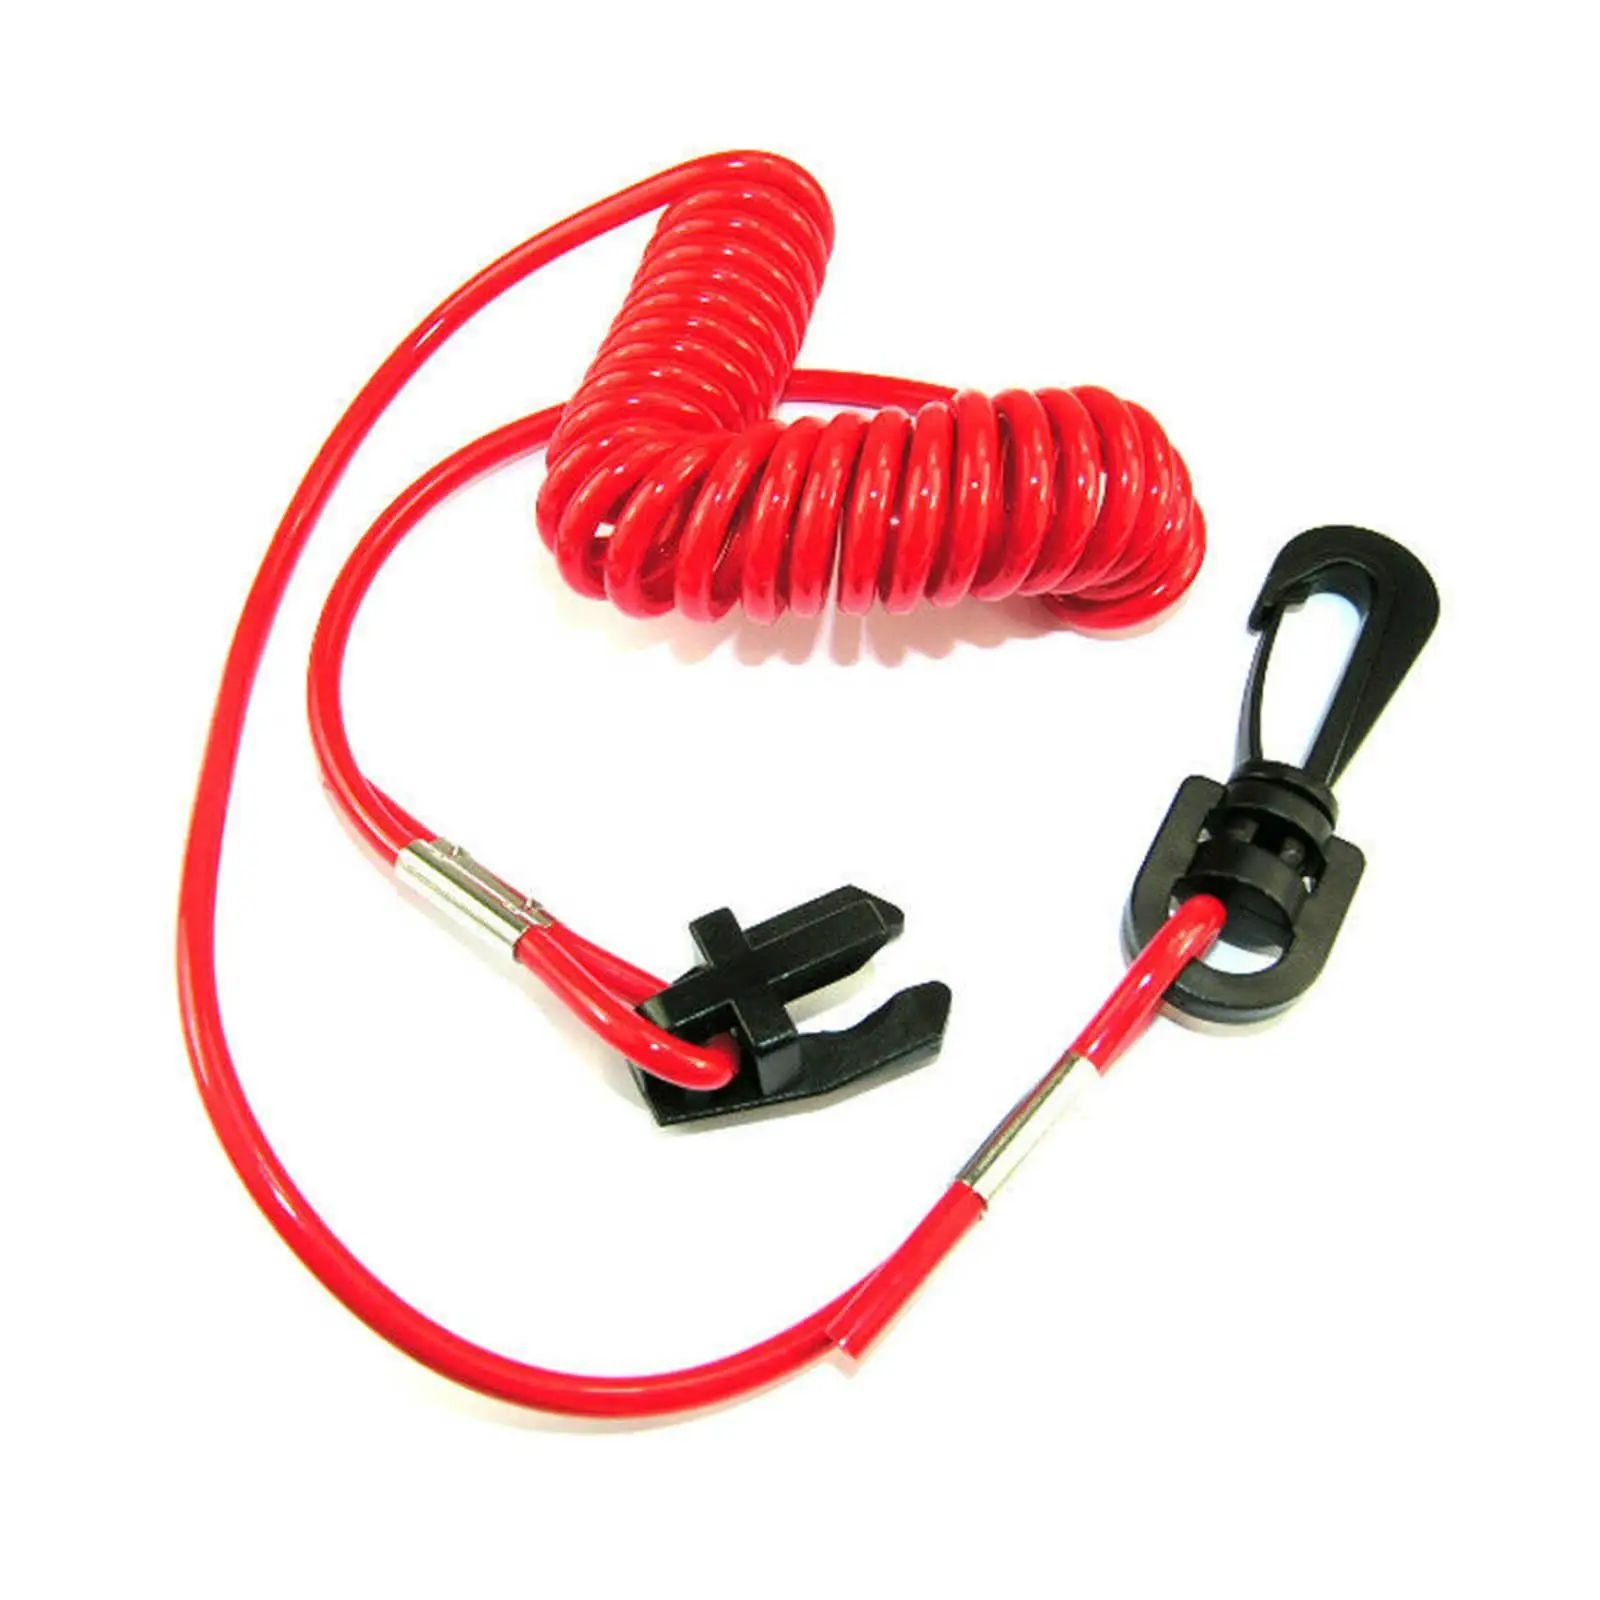 Boat Safety Kill Stop Switch Lanyard, Stop Switch Marine Safety Tether Cord Fit